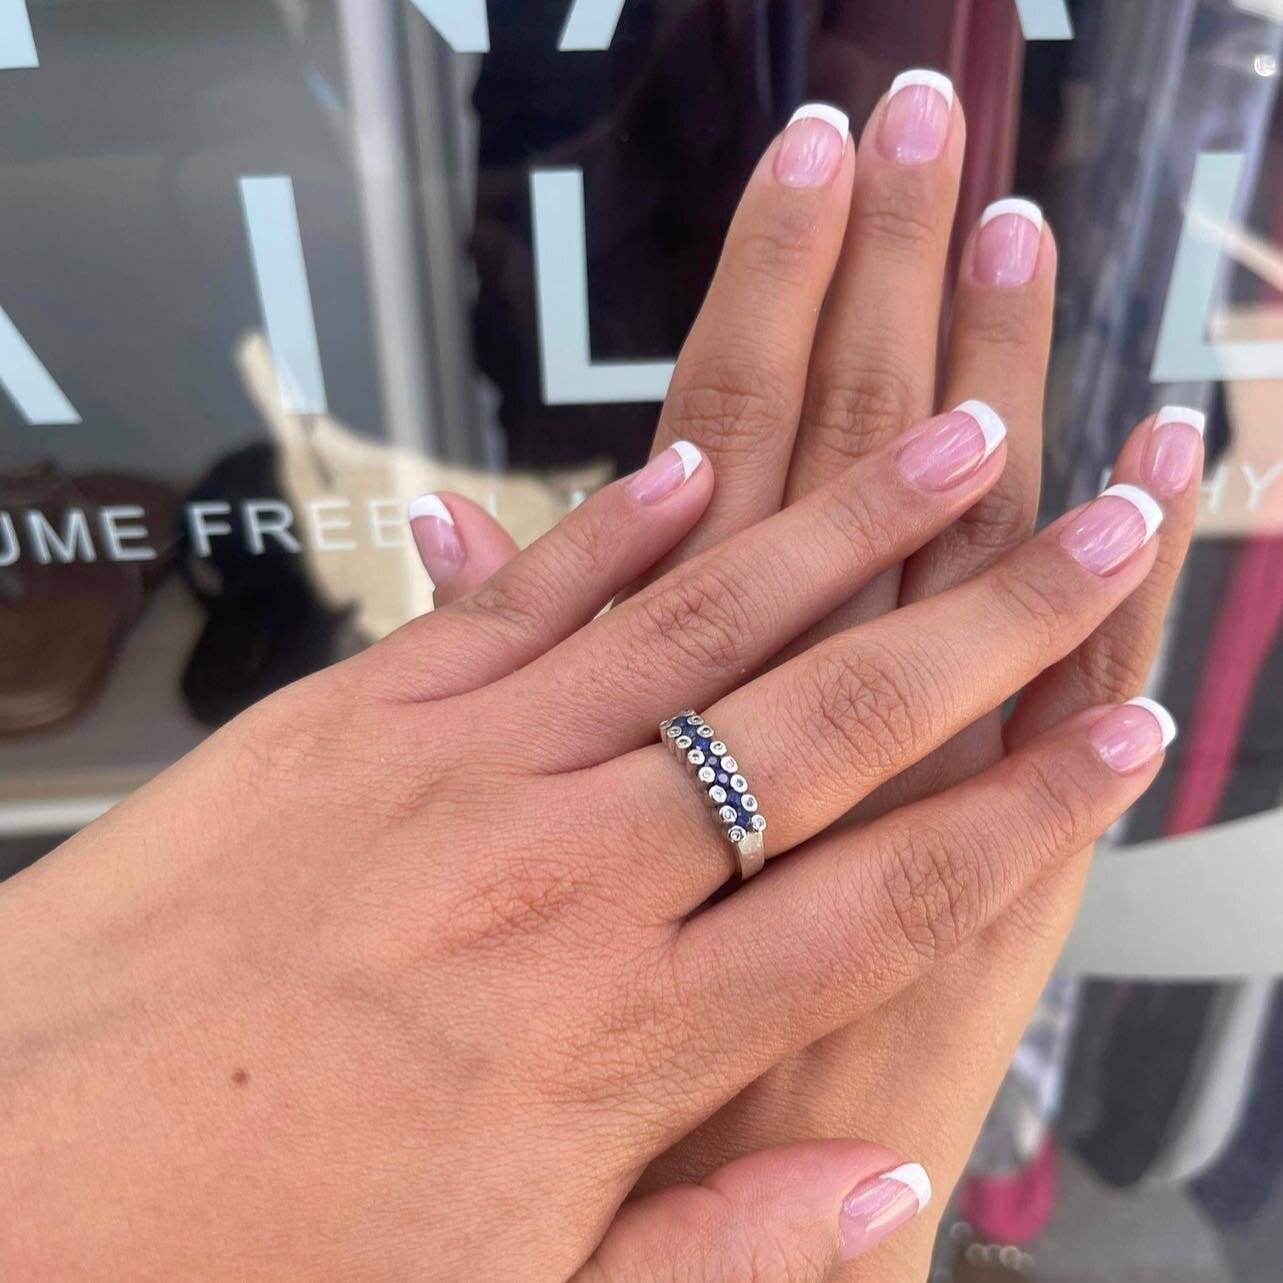 you can never go wrong with a classic french 🇫🇷🥖
:Gel Mani + Classic French Art add on:
🚫Fume Free
🚫Dust Free
🚫No drilling on the natural nail 
🚫Fast and Easy Soak Off 
🐰Cruelty Free 
🌱Vegan Friendly 
📆2 Week &ldquo;no chip&rdquo; guarantee